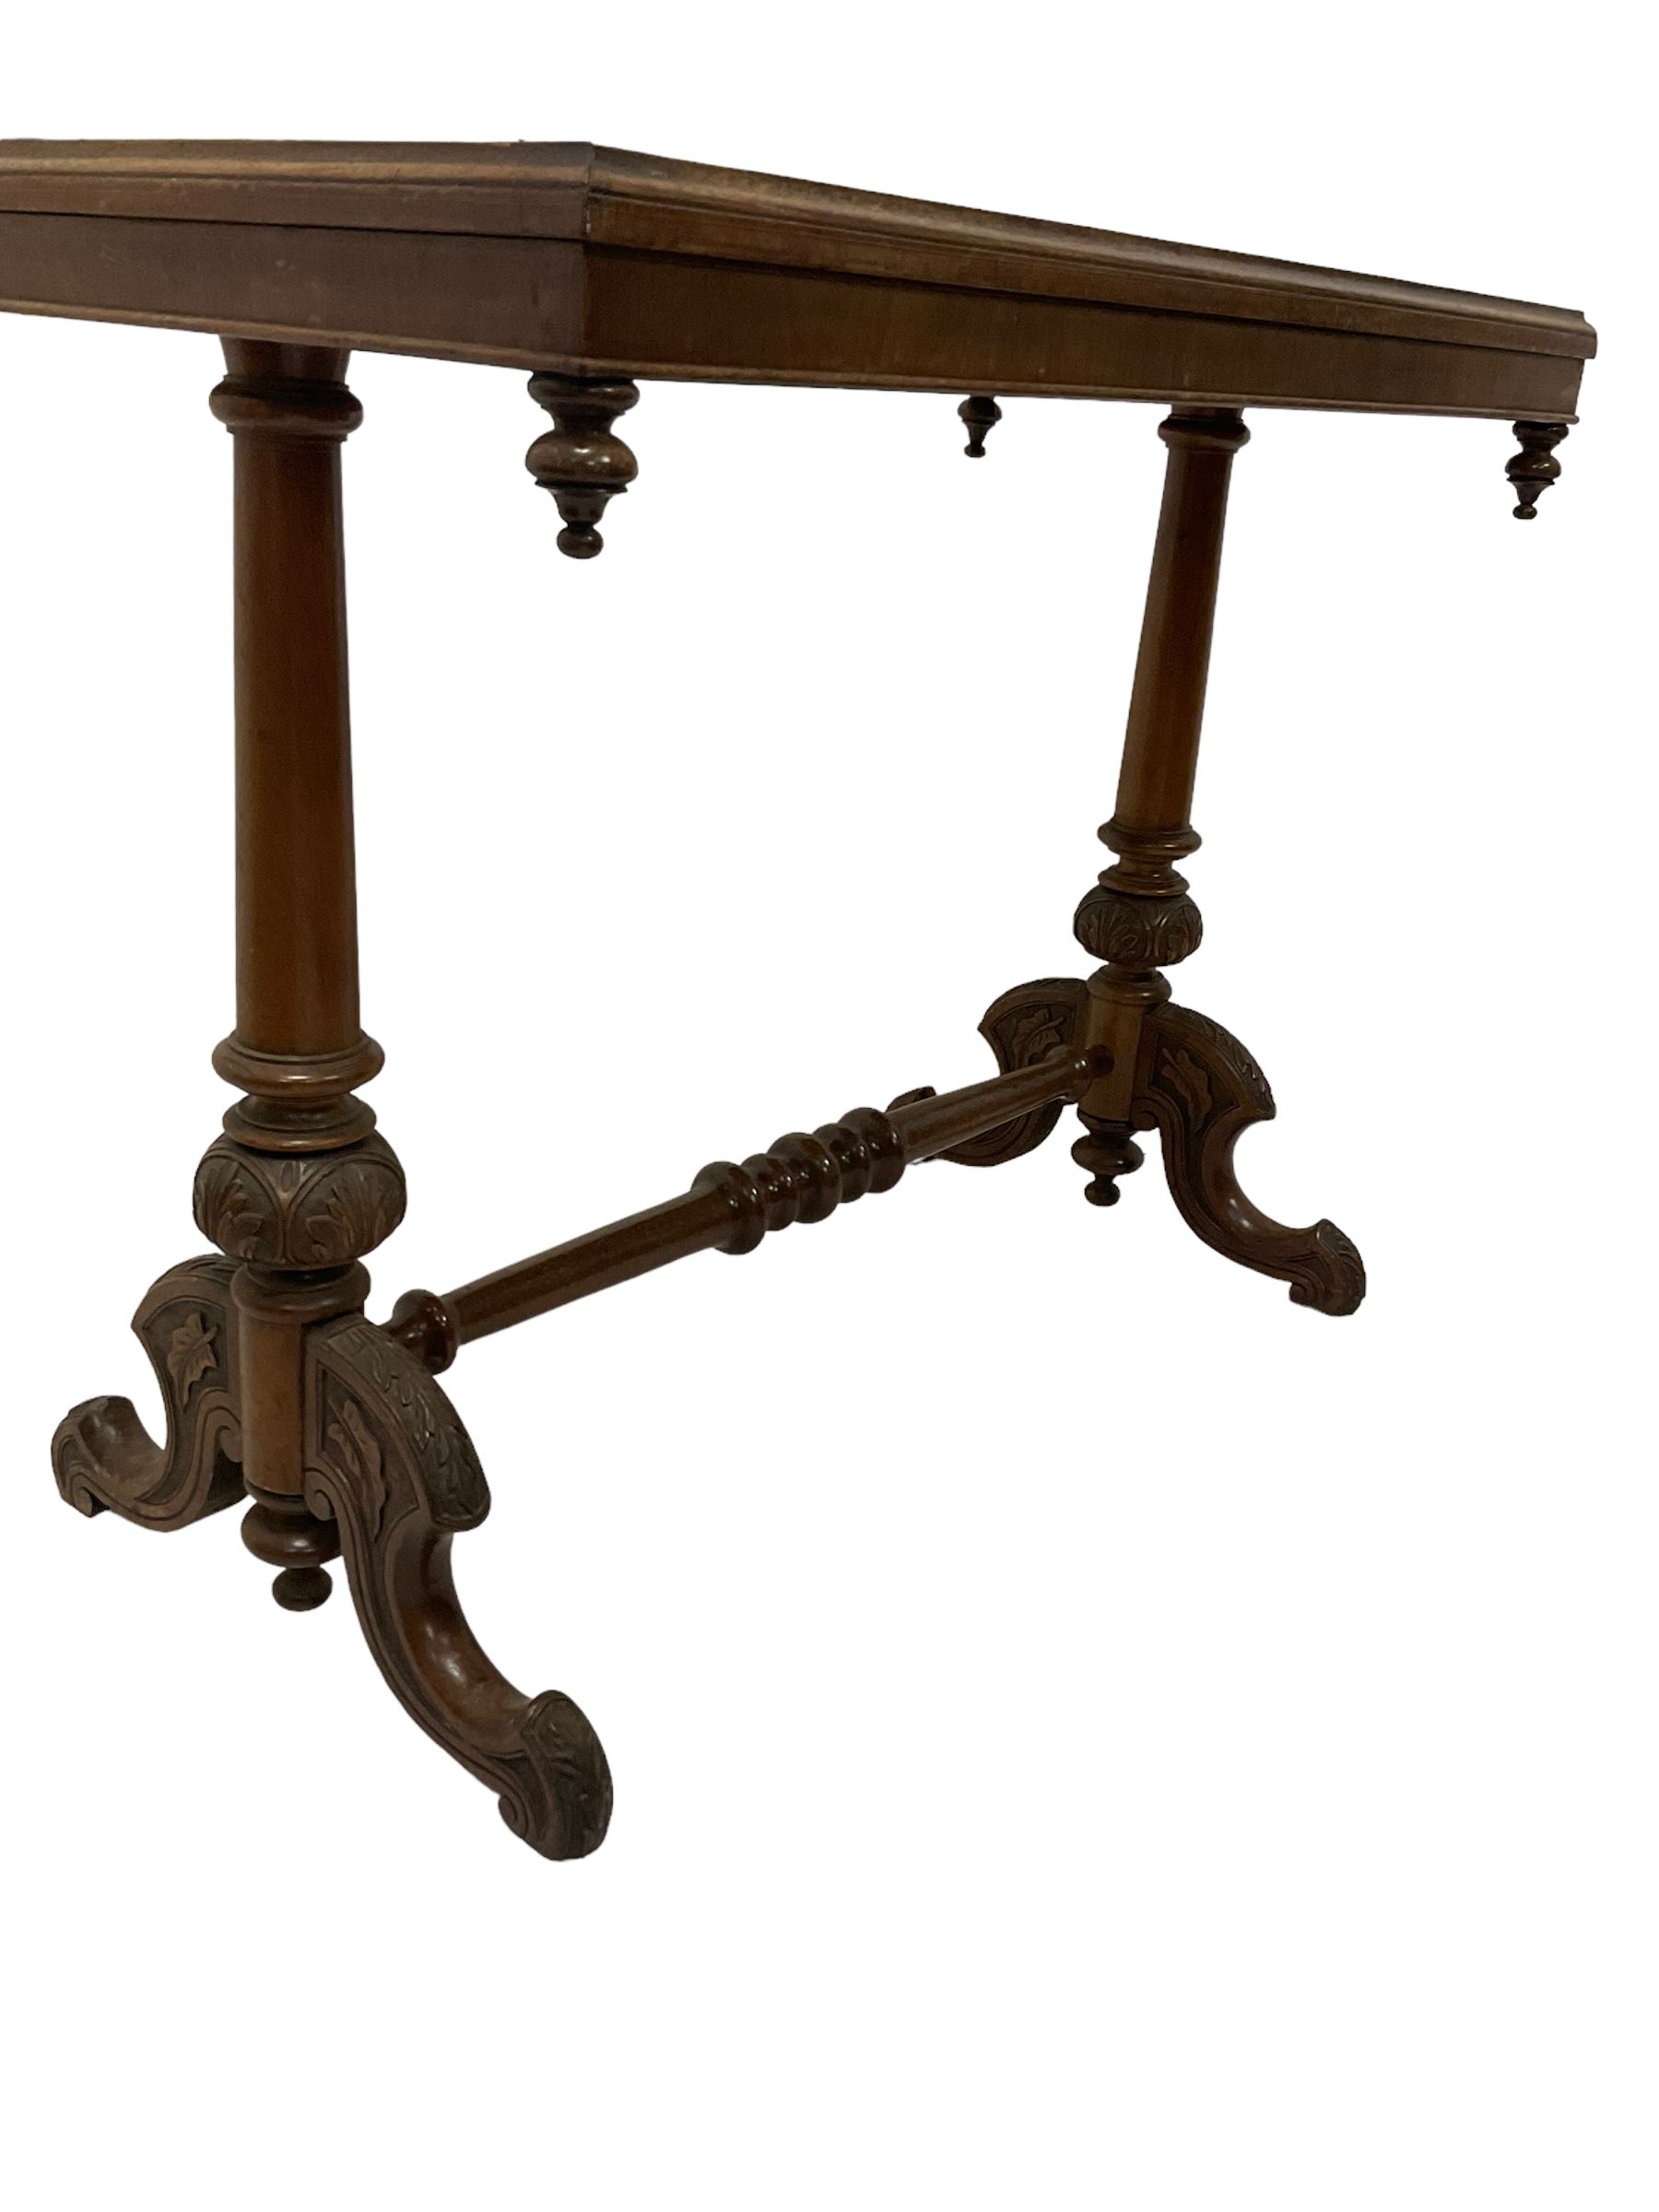 19th century parquetry wood specimen top table - Image 2 of 6